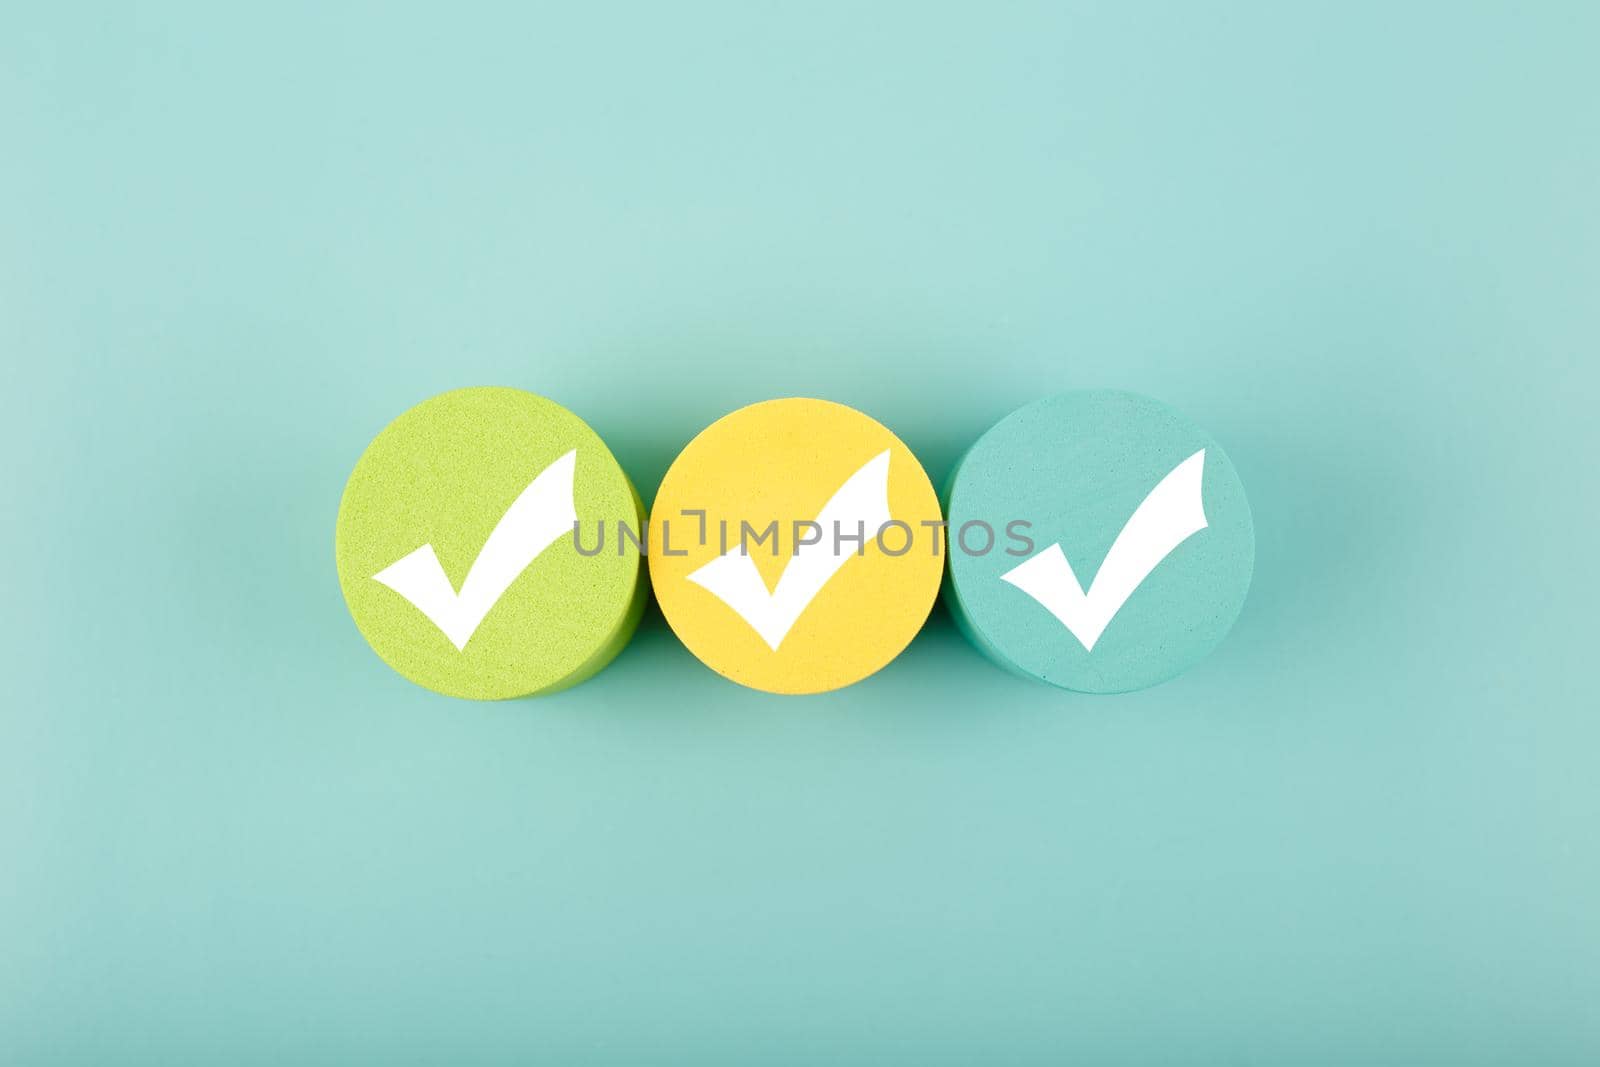 Three white checkmarks on multicolored toy circles in a row in the middle on bright aqua blue background. Concept of questionary, checklist, to do list, planning, business or verification.